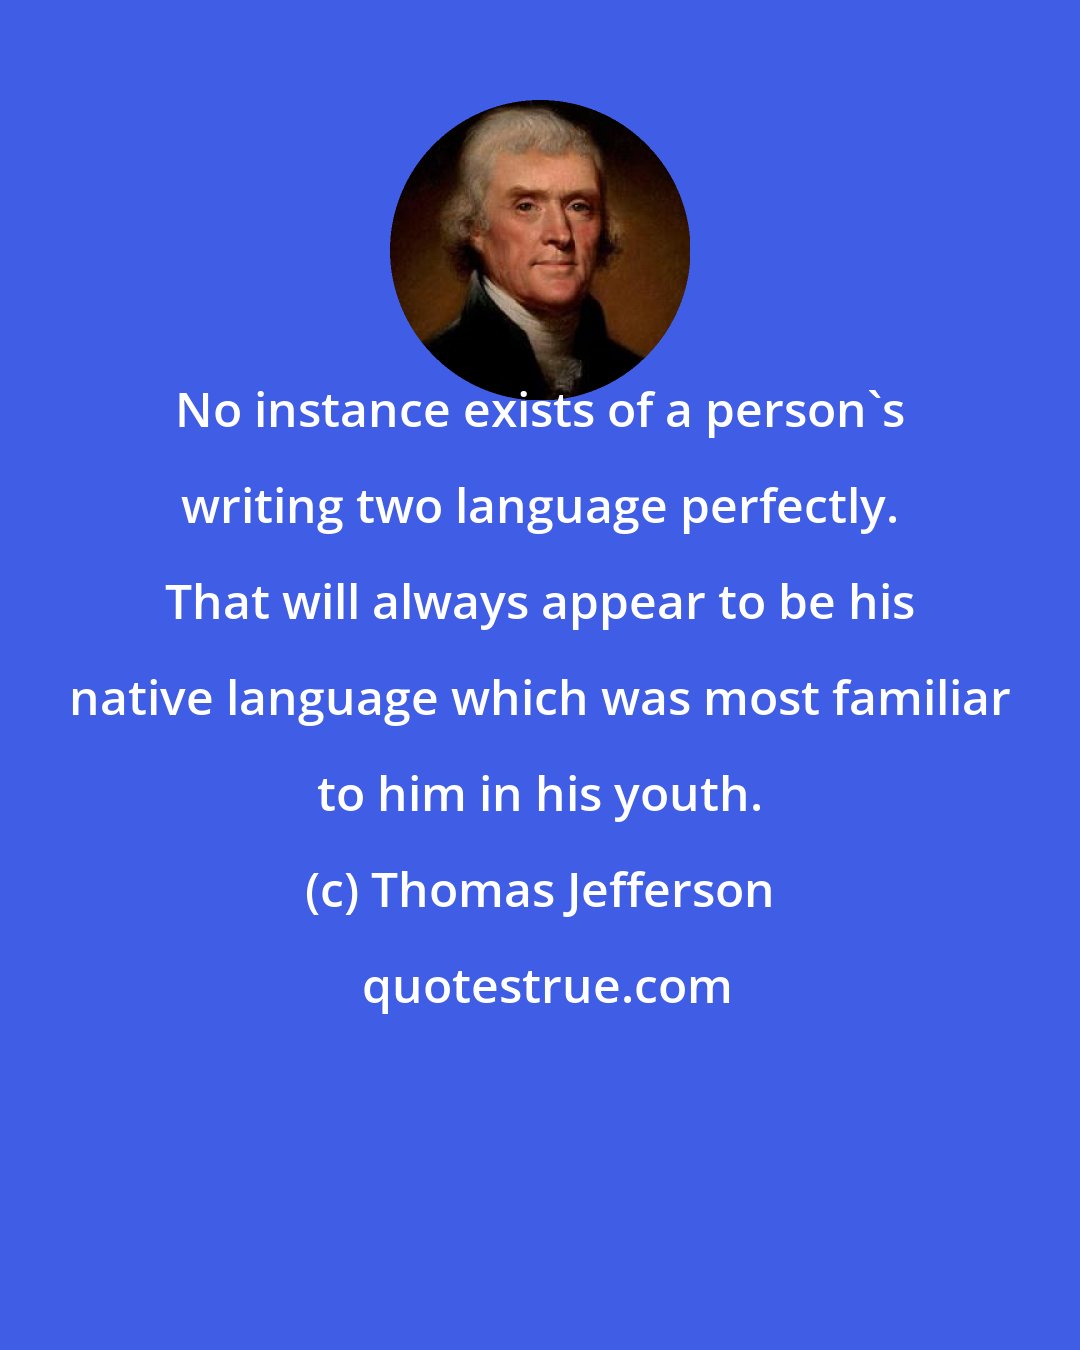 Thomas Jefferson: No instance exists of a person's writing two language perfectly. That will always appear to be his native language which was most familiar to him in his youth.